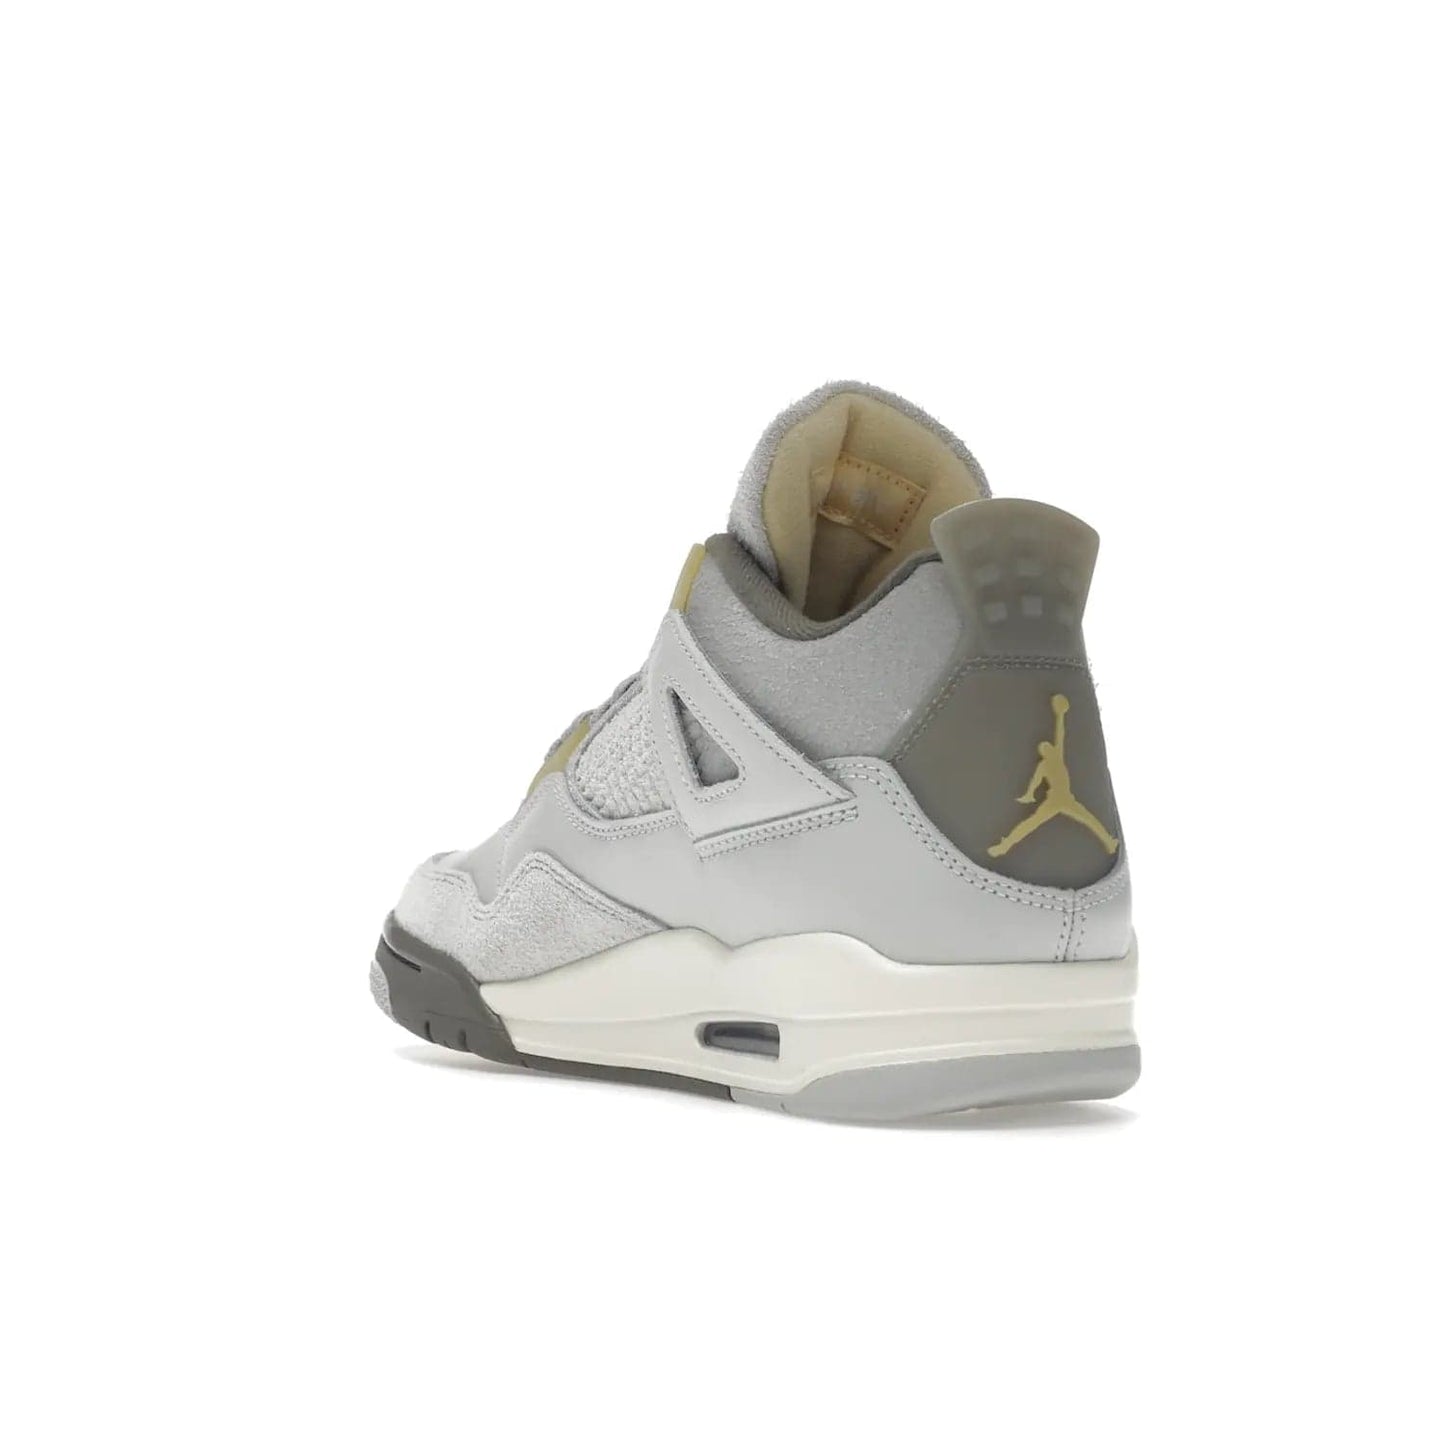 Jordan 4 Retro SE Craft Photon Dust - Image 25 - Only at www.BallersClubKickz.com - Upgrade your shoe collection with the Air Jordan 4 Retro SE Craft Photon Dust. This luxurious sneaker features a combination of suede and leather with unique grey tones like Photon Dust, Pale Vanilla, Off White, Grey Fog, Flat Pewter, and Sail. Available February 11, 2023.